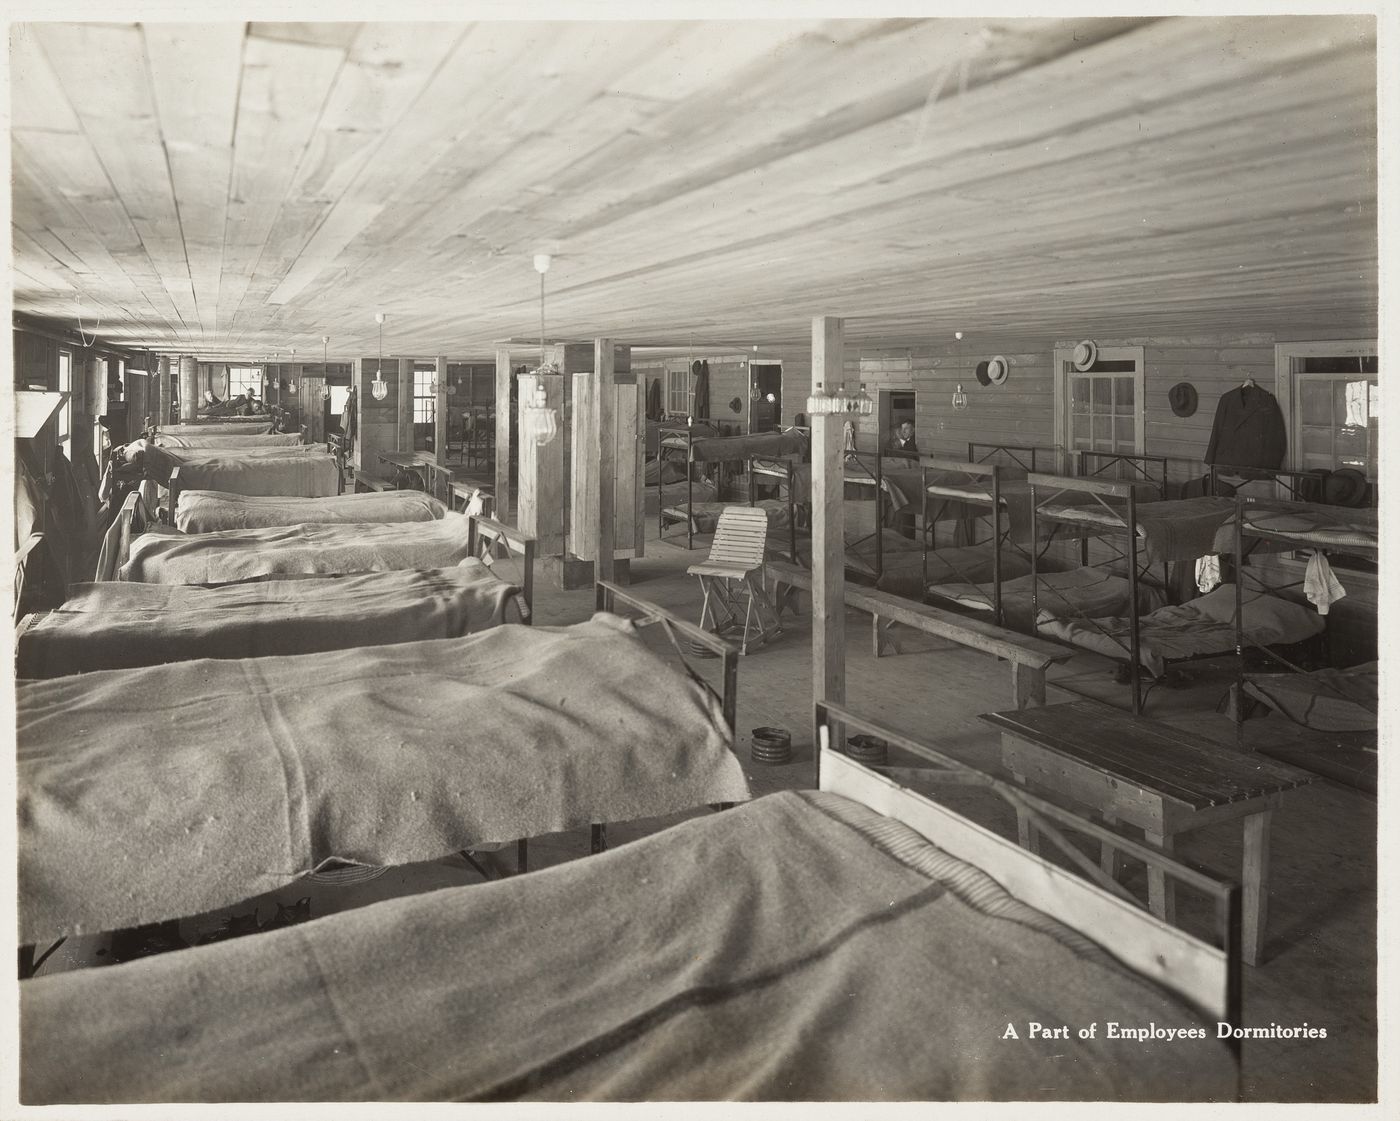 Interior view of employees dormitories at the Energite Explosives Plant No. 3, the Shell Loading Plant, Renfrew, Ontario, Canada